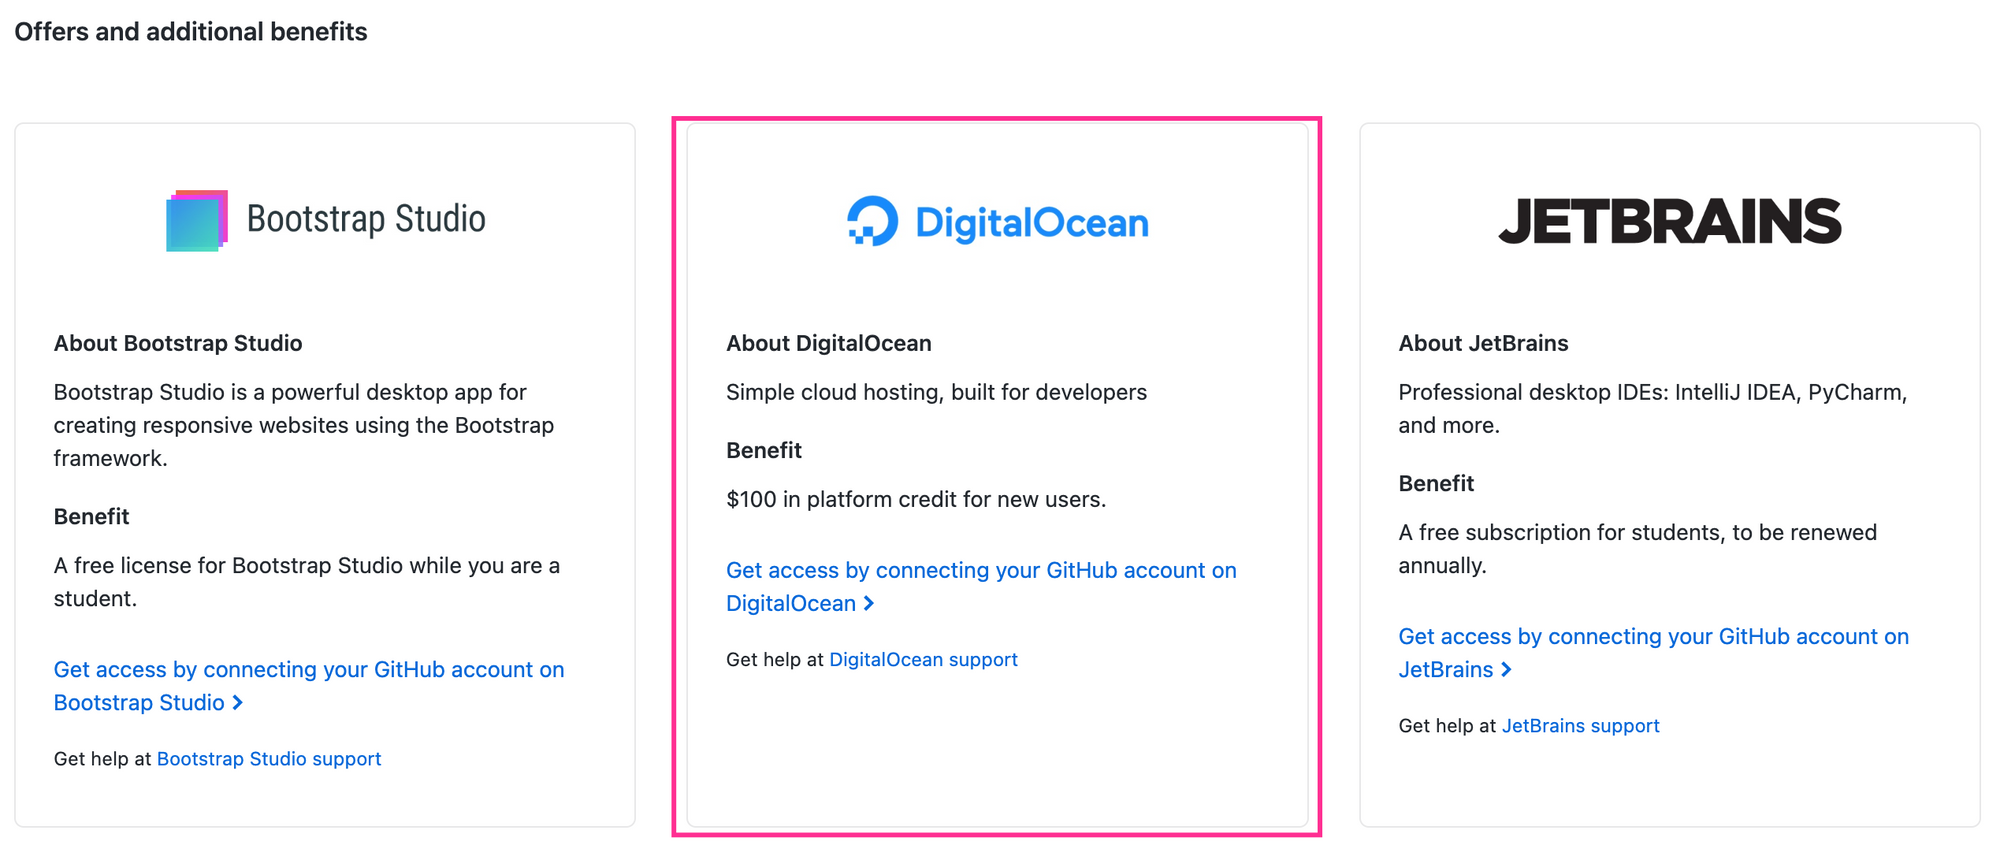 How to build and host a website using Ghost and CloudFlare on a Digital Ocean Droplet